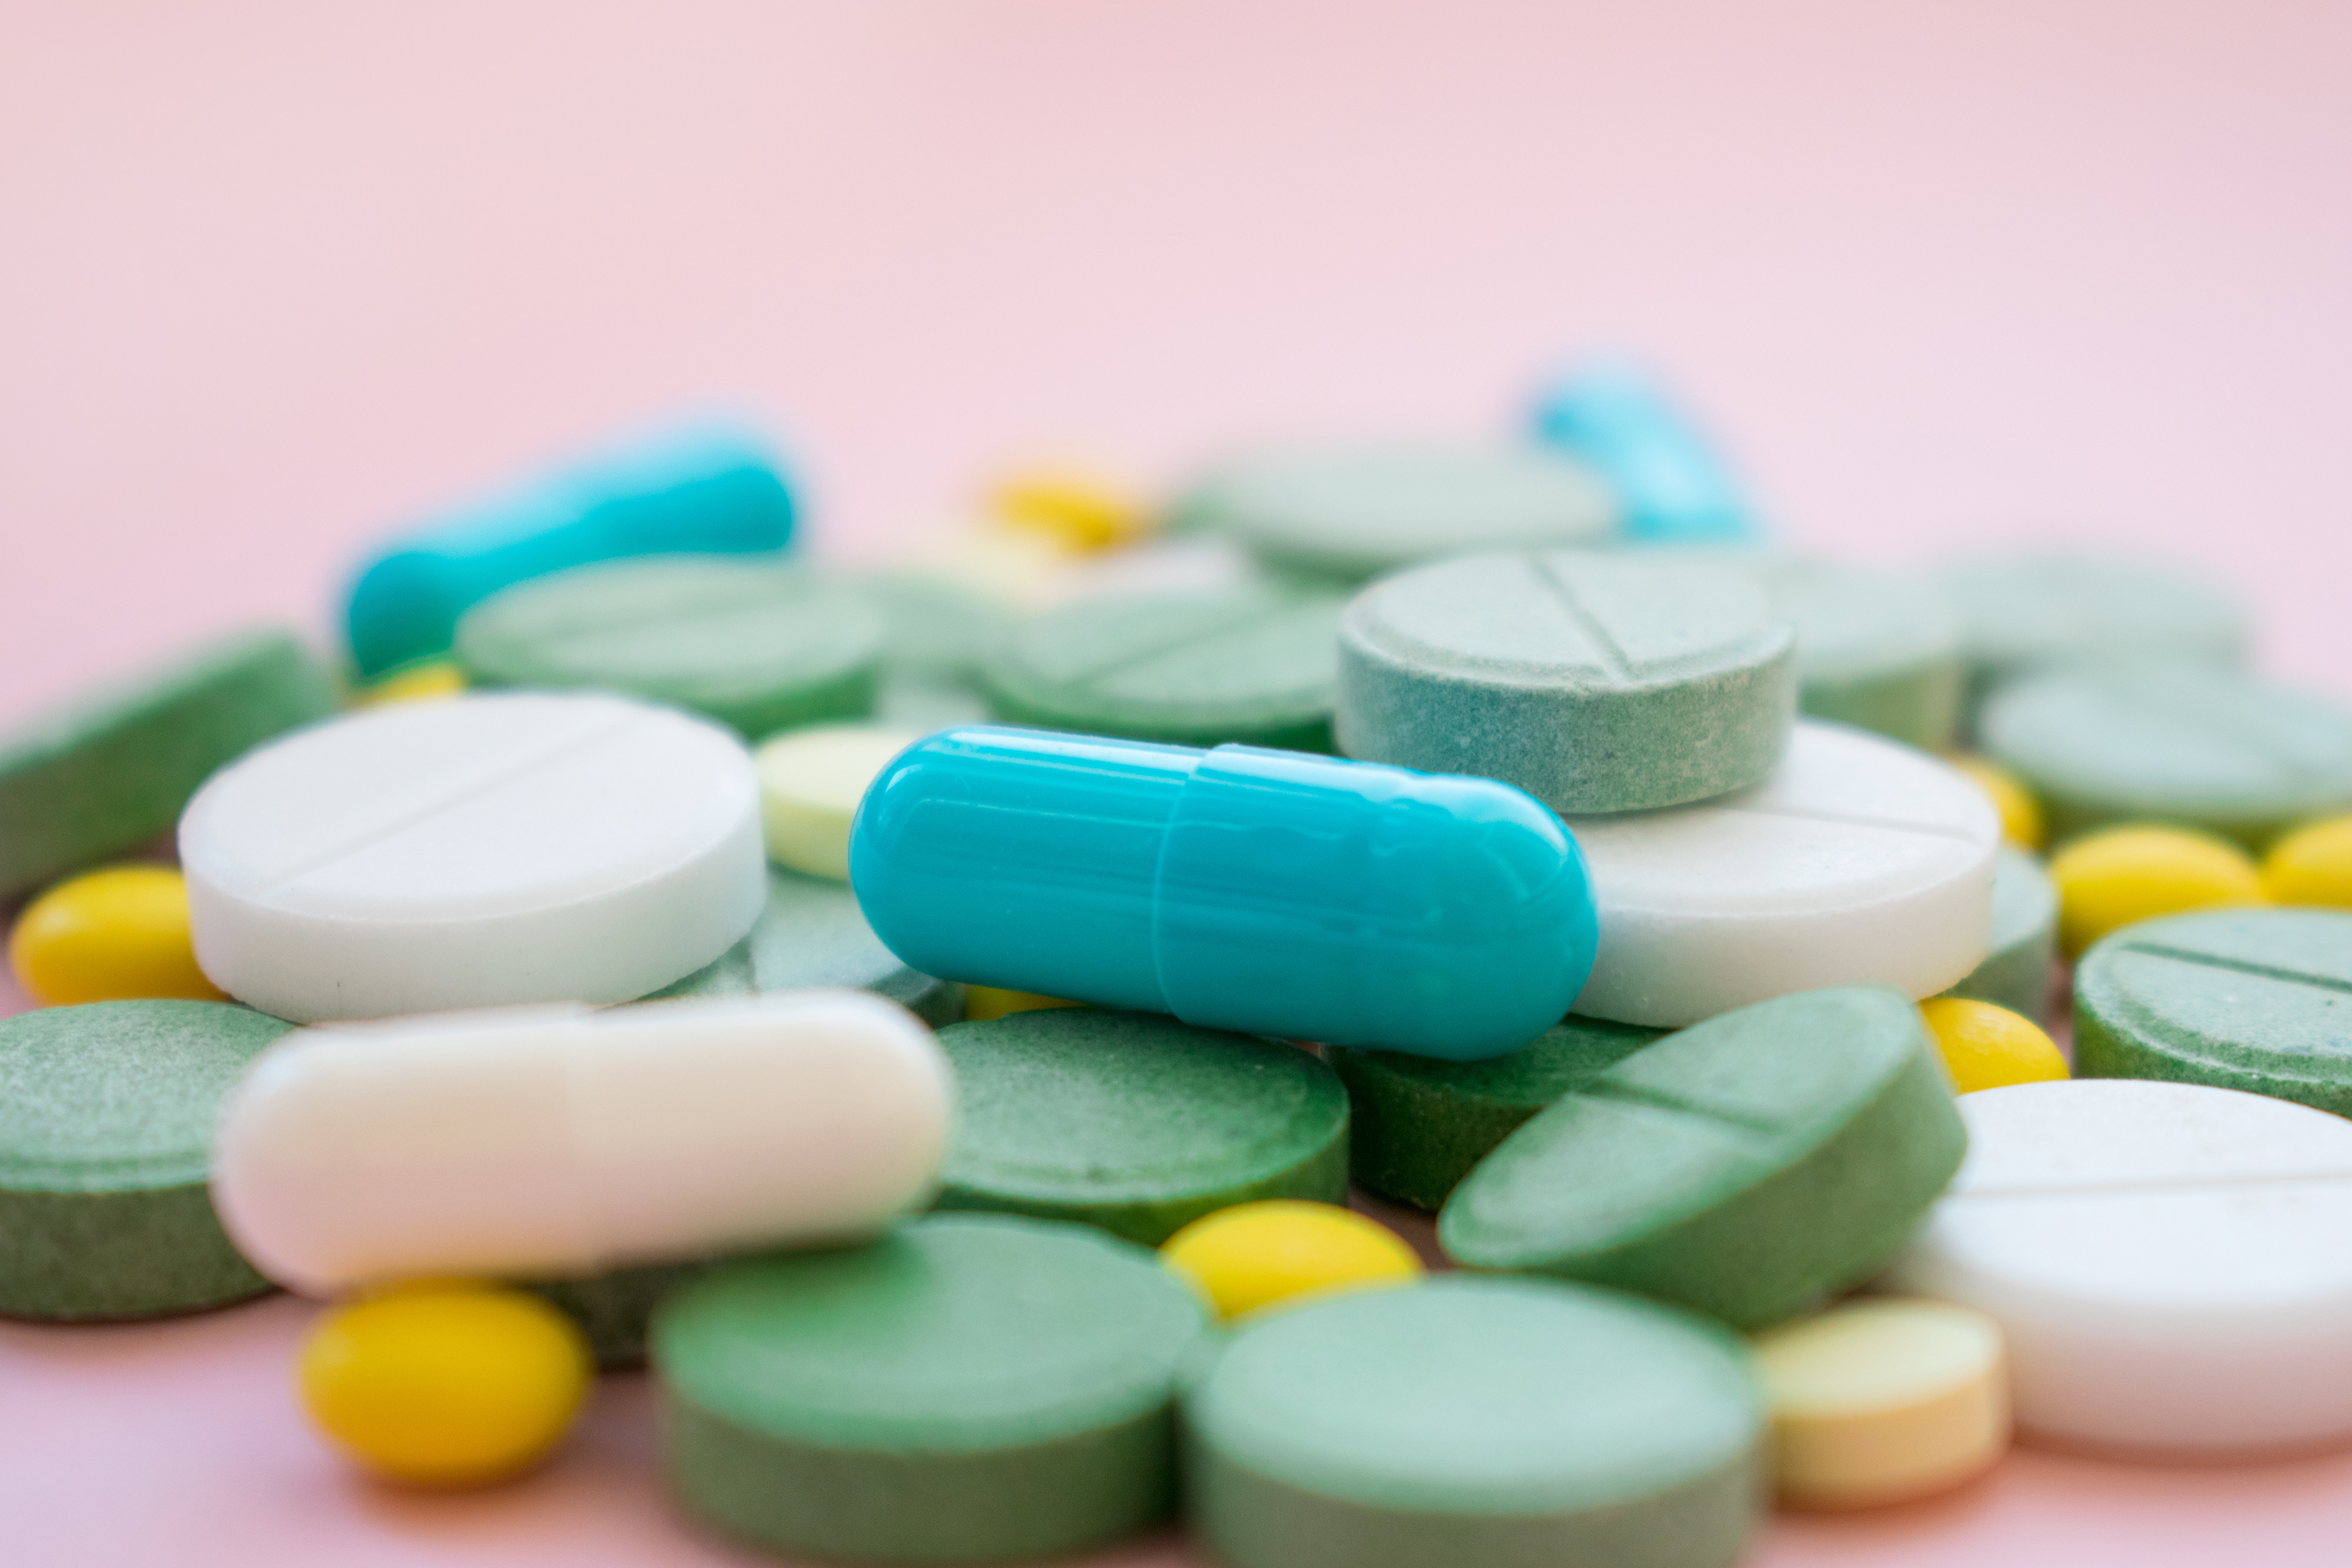 Scientists approve of the Hong Kong health minister’s suggestion that the city has its own drug regulatory approval system. Photo: Shutterstock